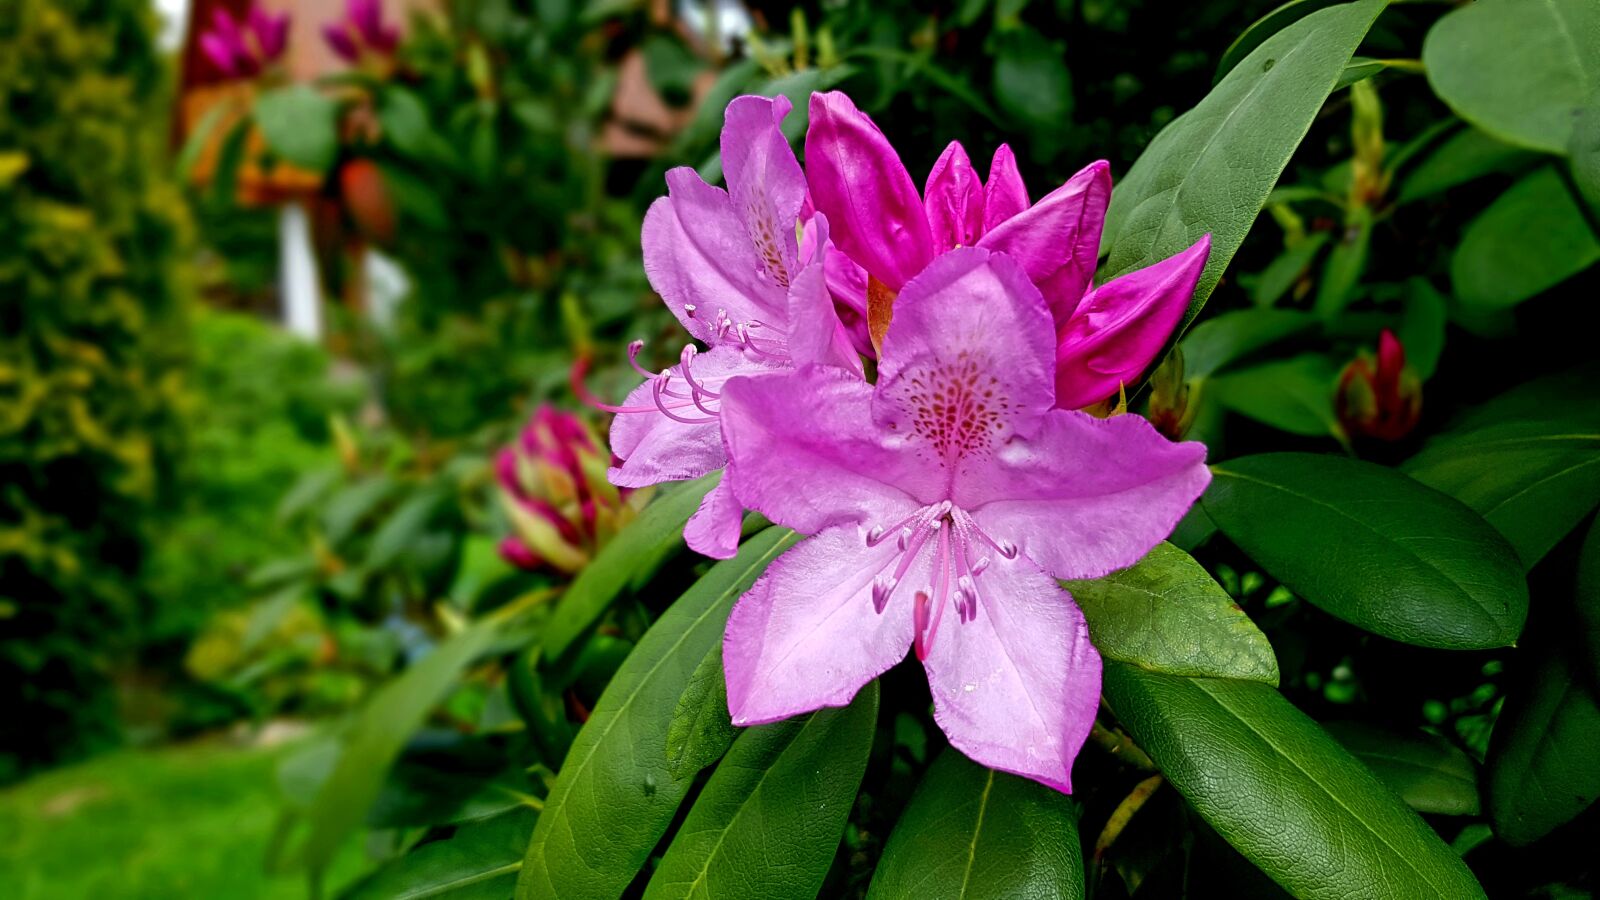 Samsung Galaxy S7 sample photo. Rhododendron flower, blossom, bloom photography